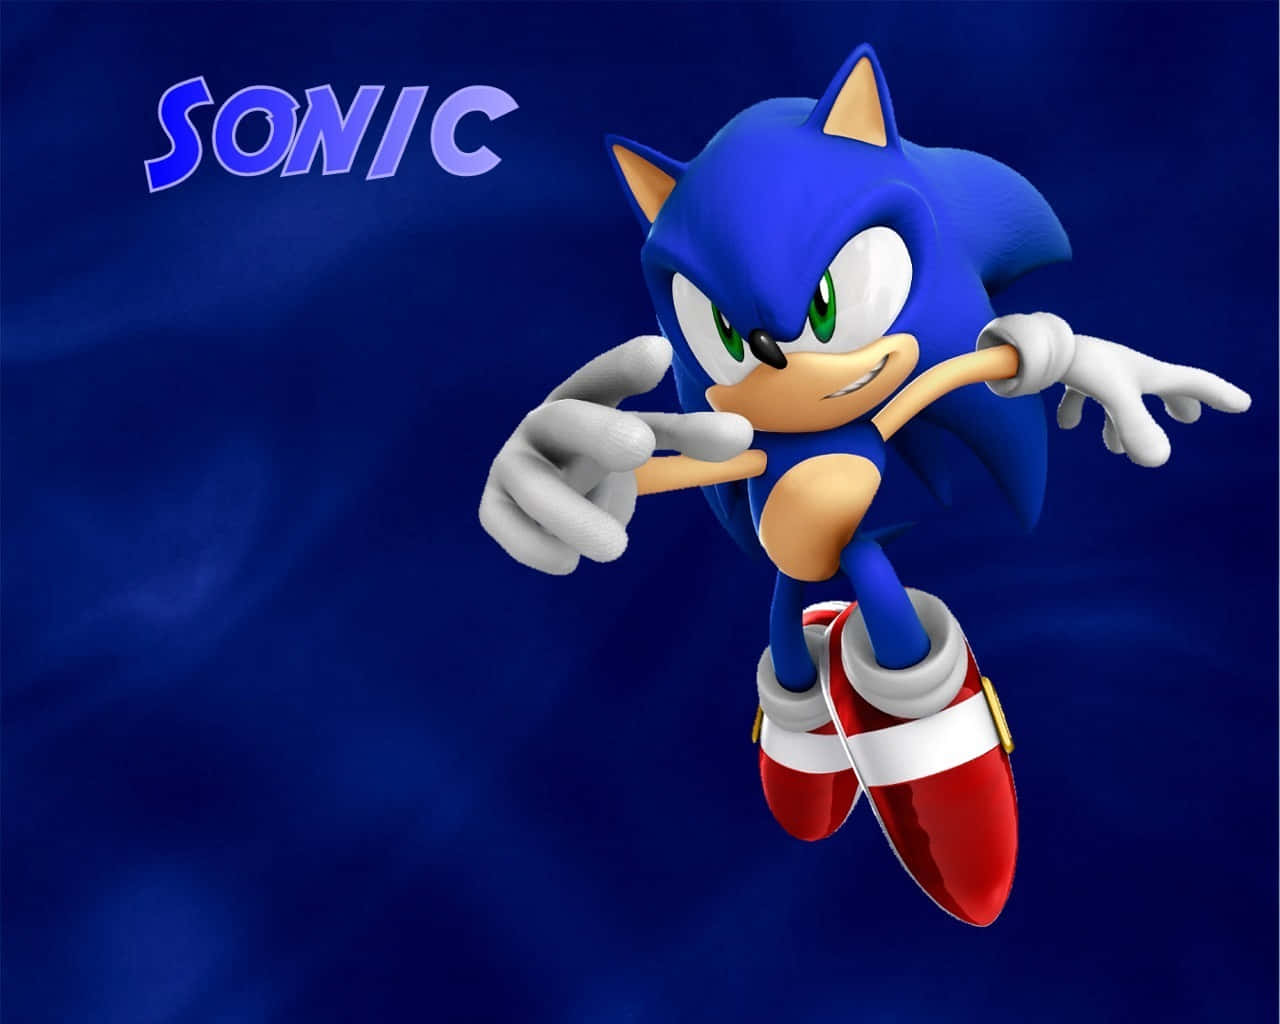 Classic Sonic - The Speed of Sound